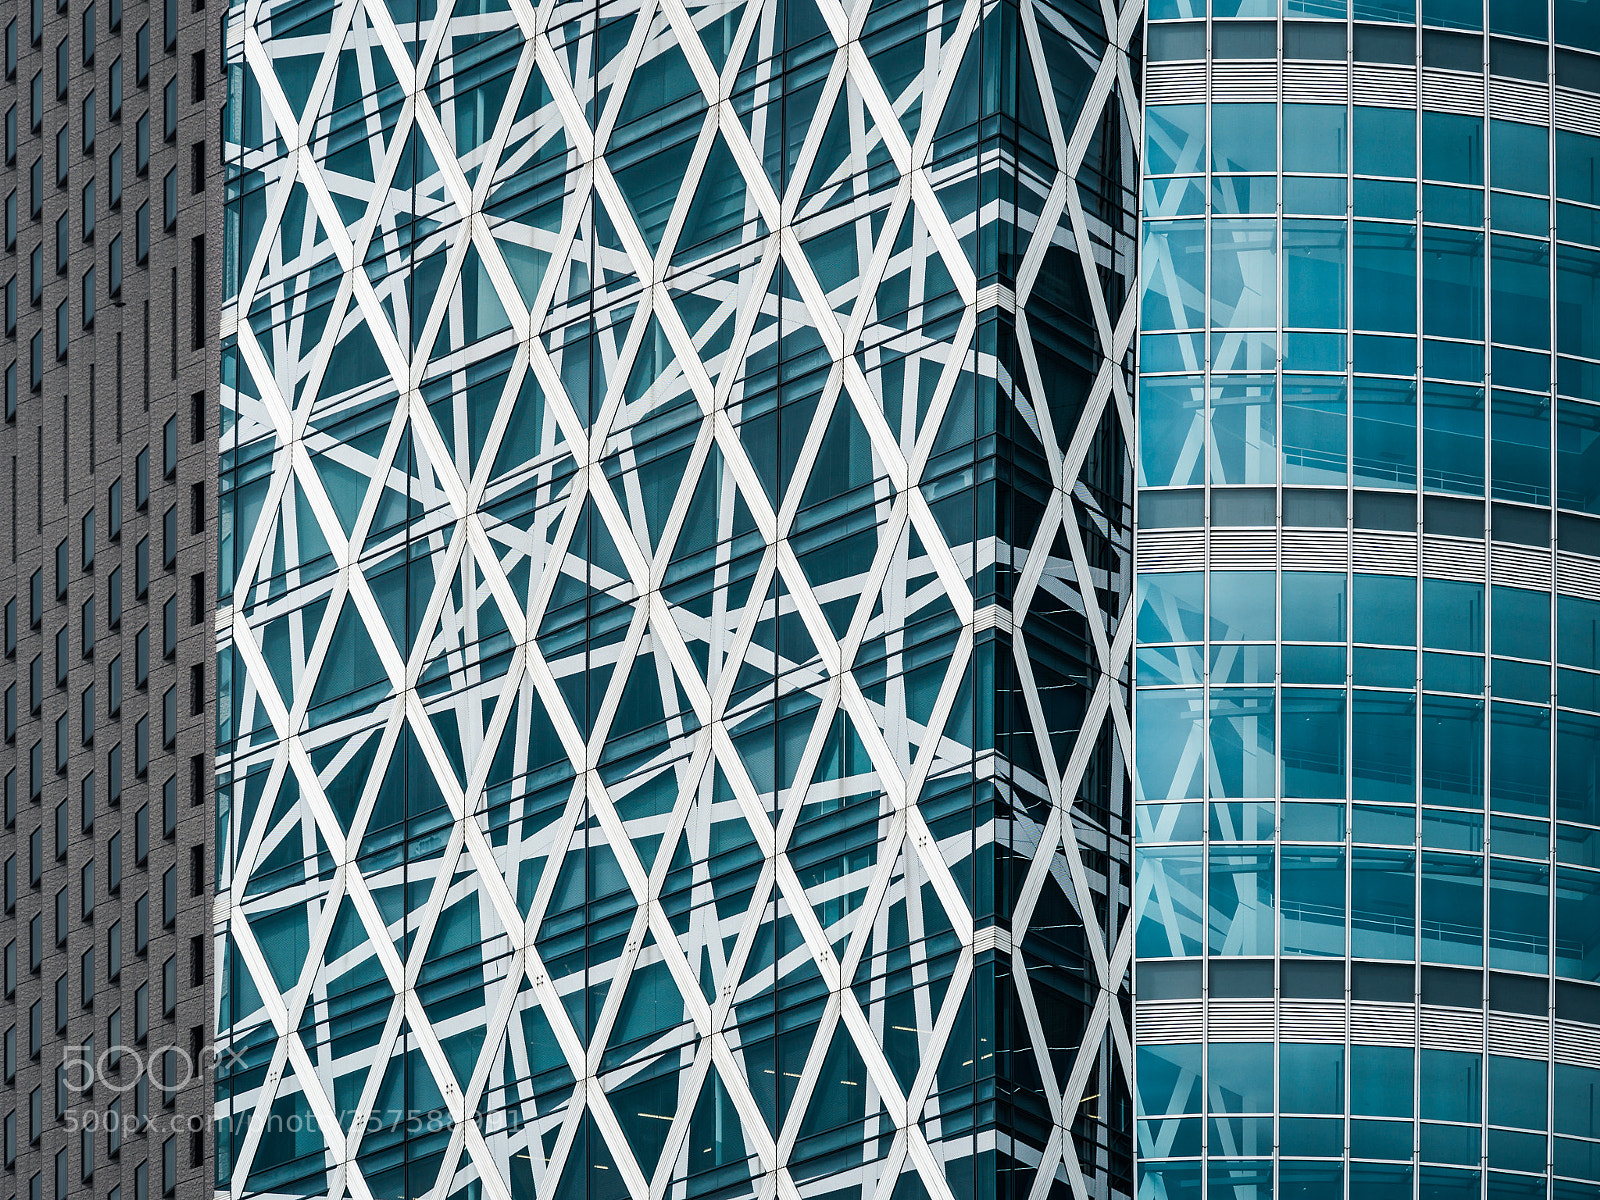 Sony a6300 sample photo. Mode gakuen cocoon tower photography